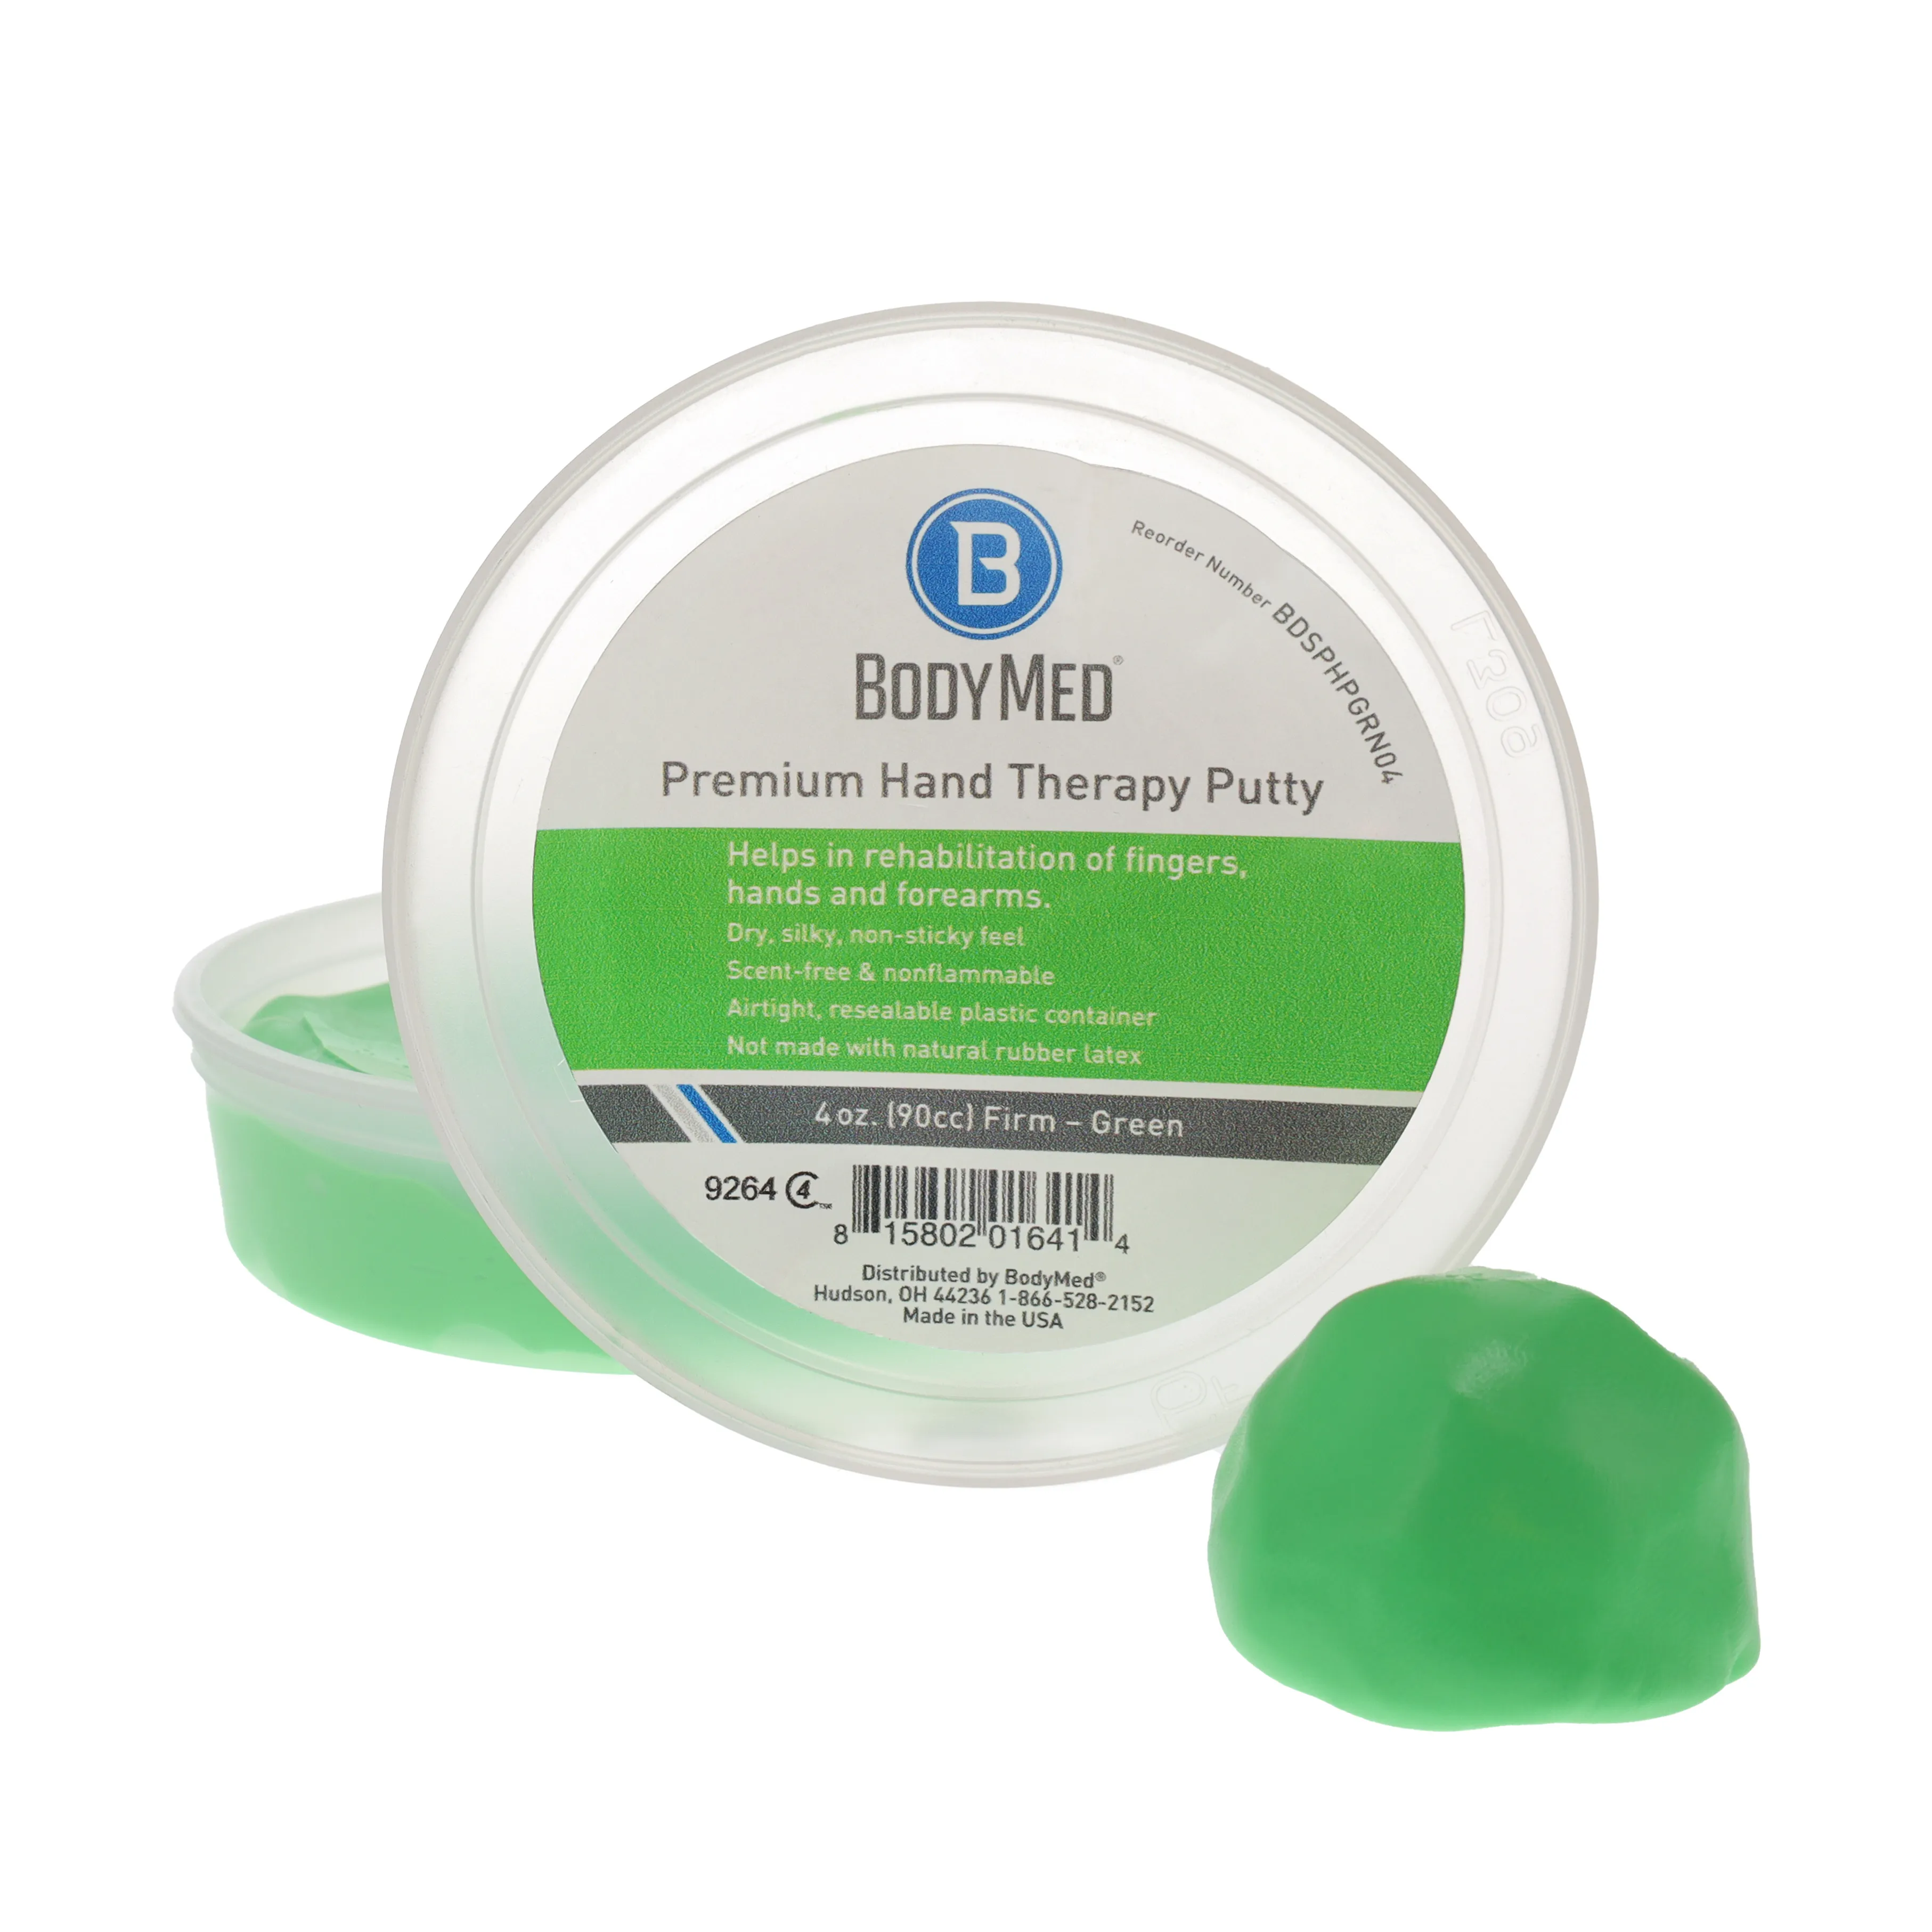 Bodymed - 10-1413PLBS - Premium Hand Therapy Putty - Firm